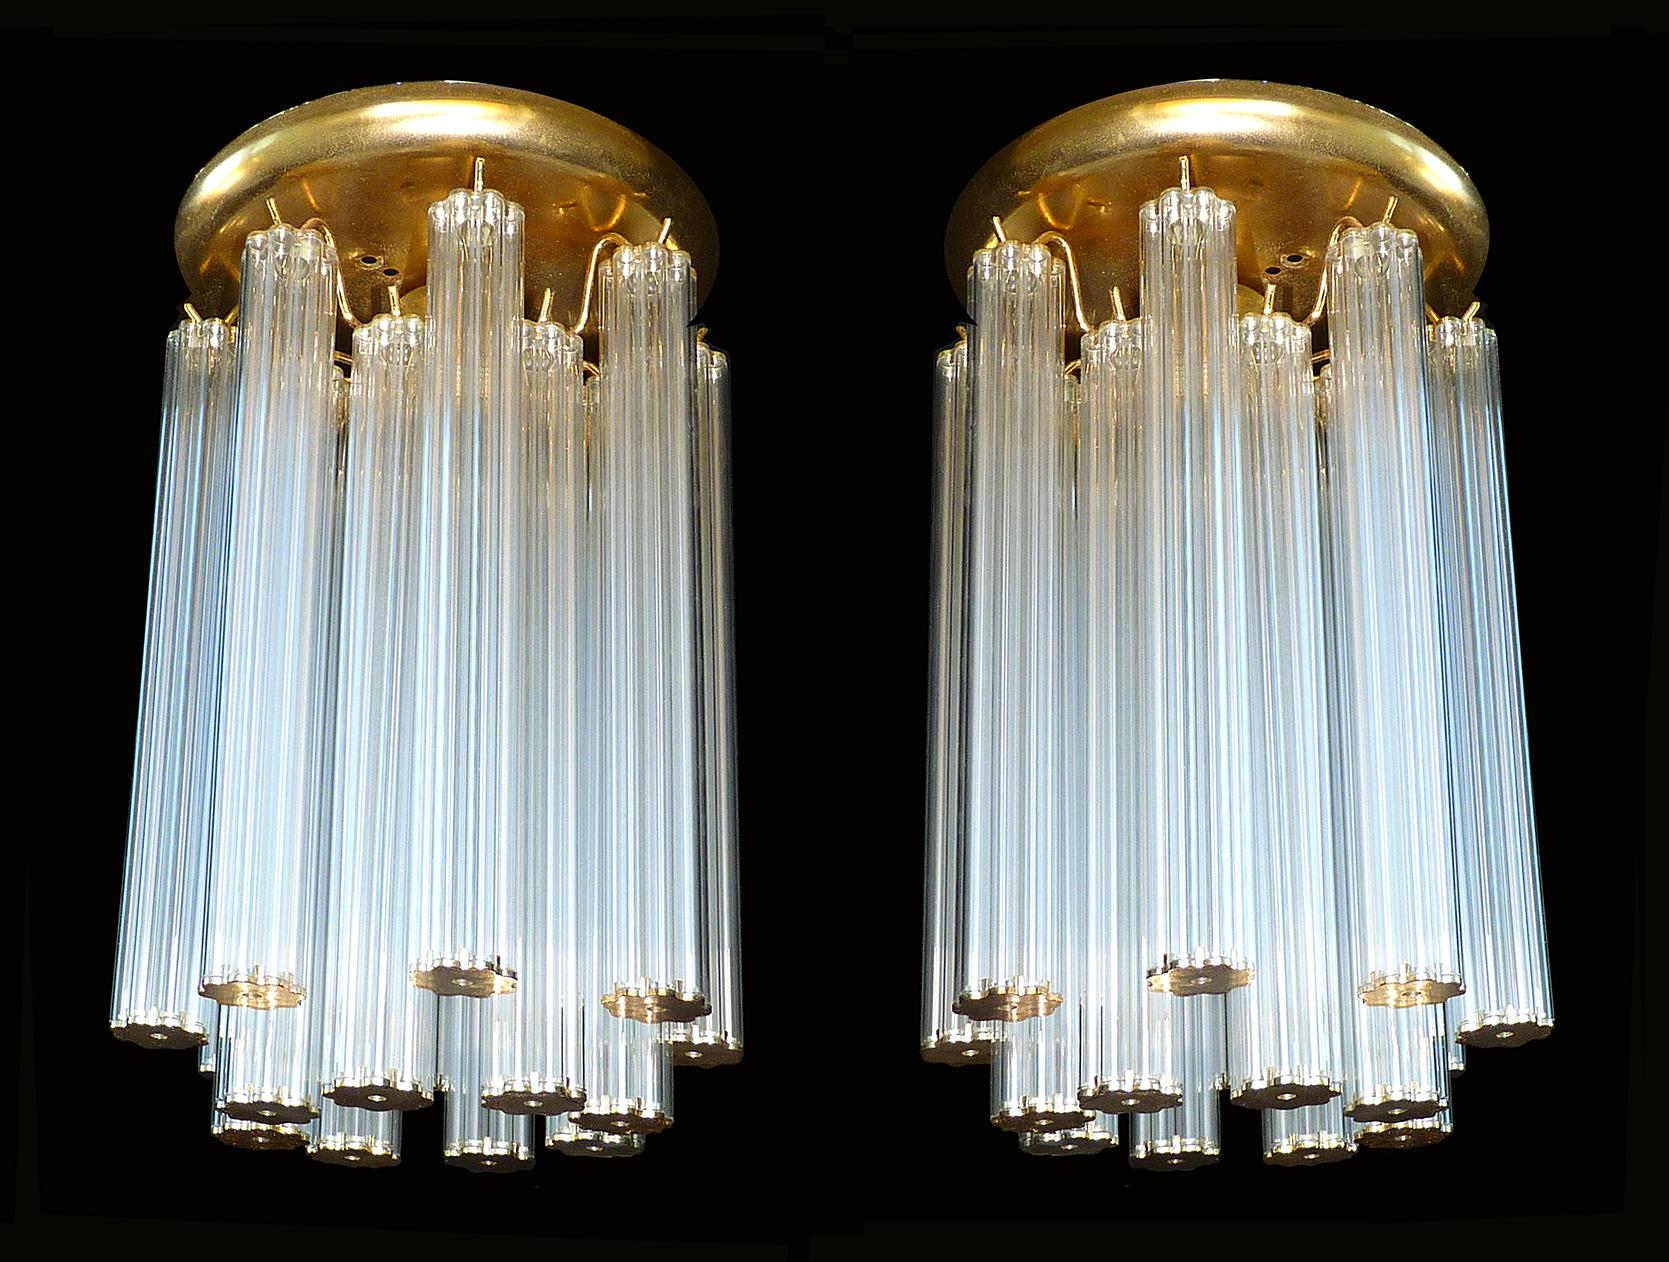 Measures:
Diameter 8 in/ 20 cm
Height 13.7 in/ 35 cm
Weight: 3,5 Kg / 8 lb
1-light bulb E-27, 60w, good working condition
128/ 16 sets of 8 glass tubes each in 2 layers
Also have matching chandeliers and sconces
Assembly required. Bulbs not included.